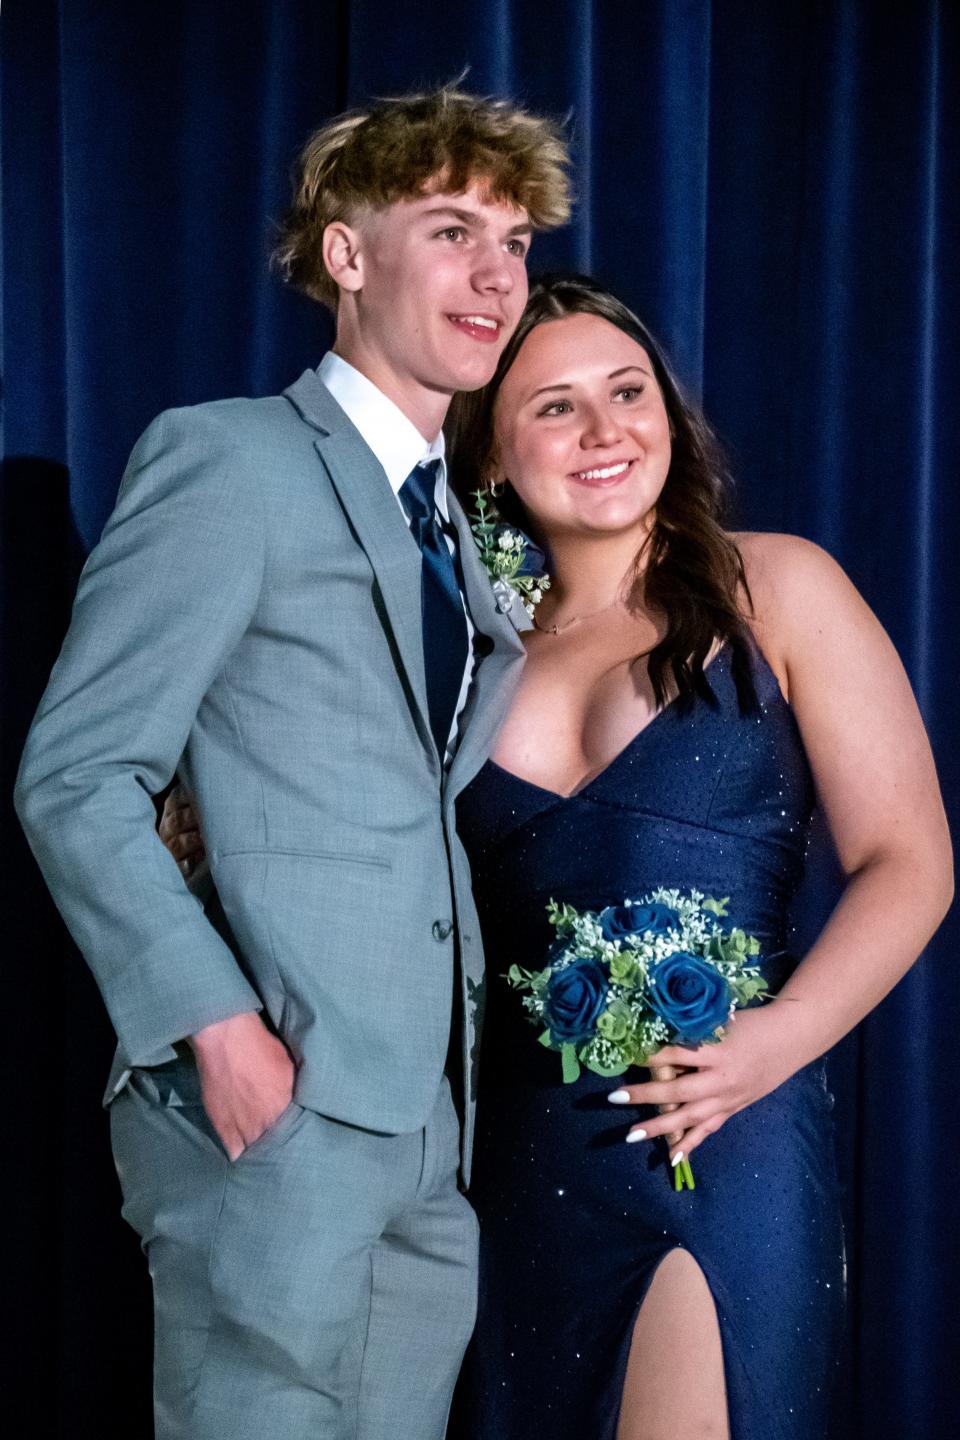 Cambridge High School held its 2024 prom at the high school on Saturday, with a Great Gatsby-inspired theme.